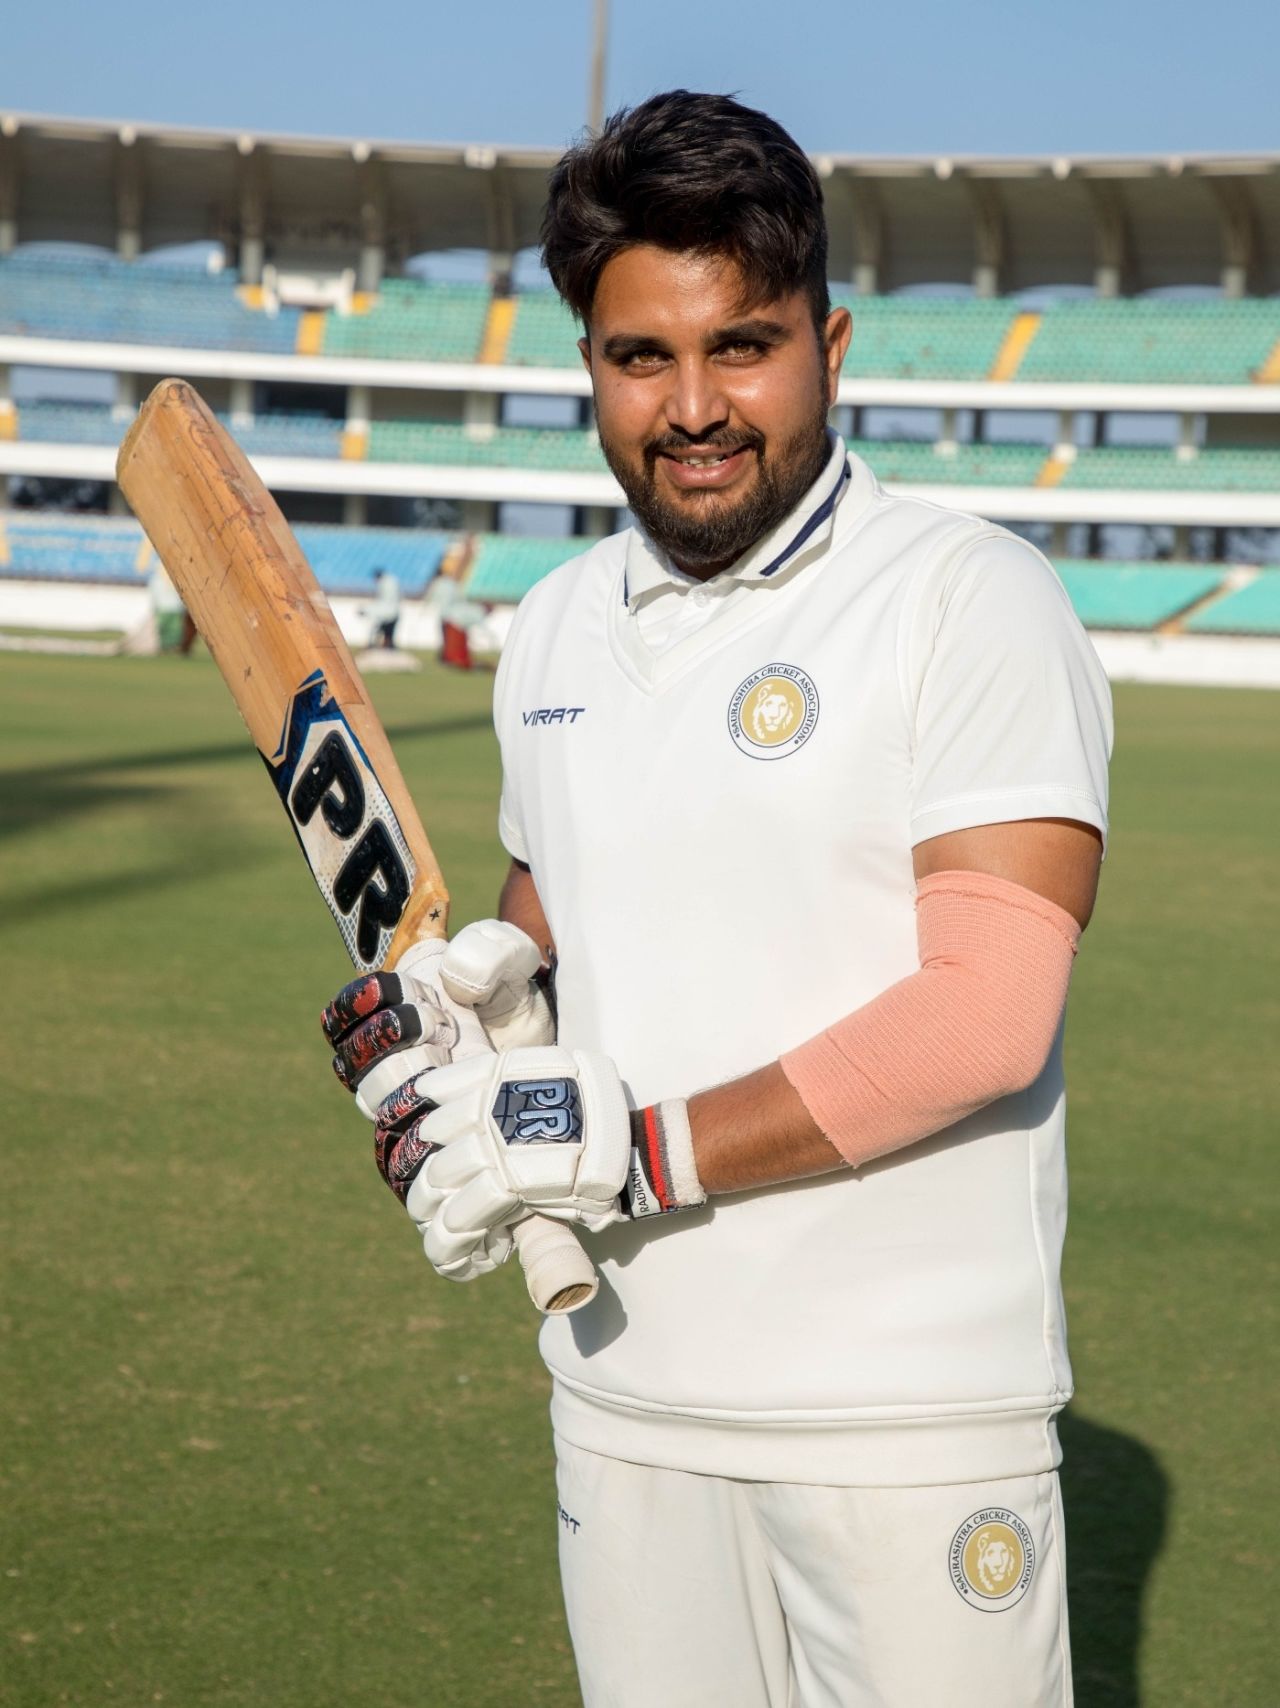 Snell Patel poses after his well-made 70, Saurashtra vs Punjab, Rajkot, 1st day, Ranji Trophy, Quarterfinals, January 31, 2023